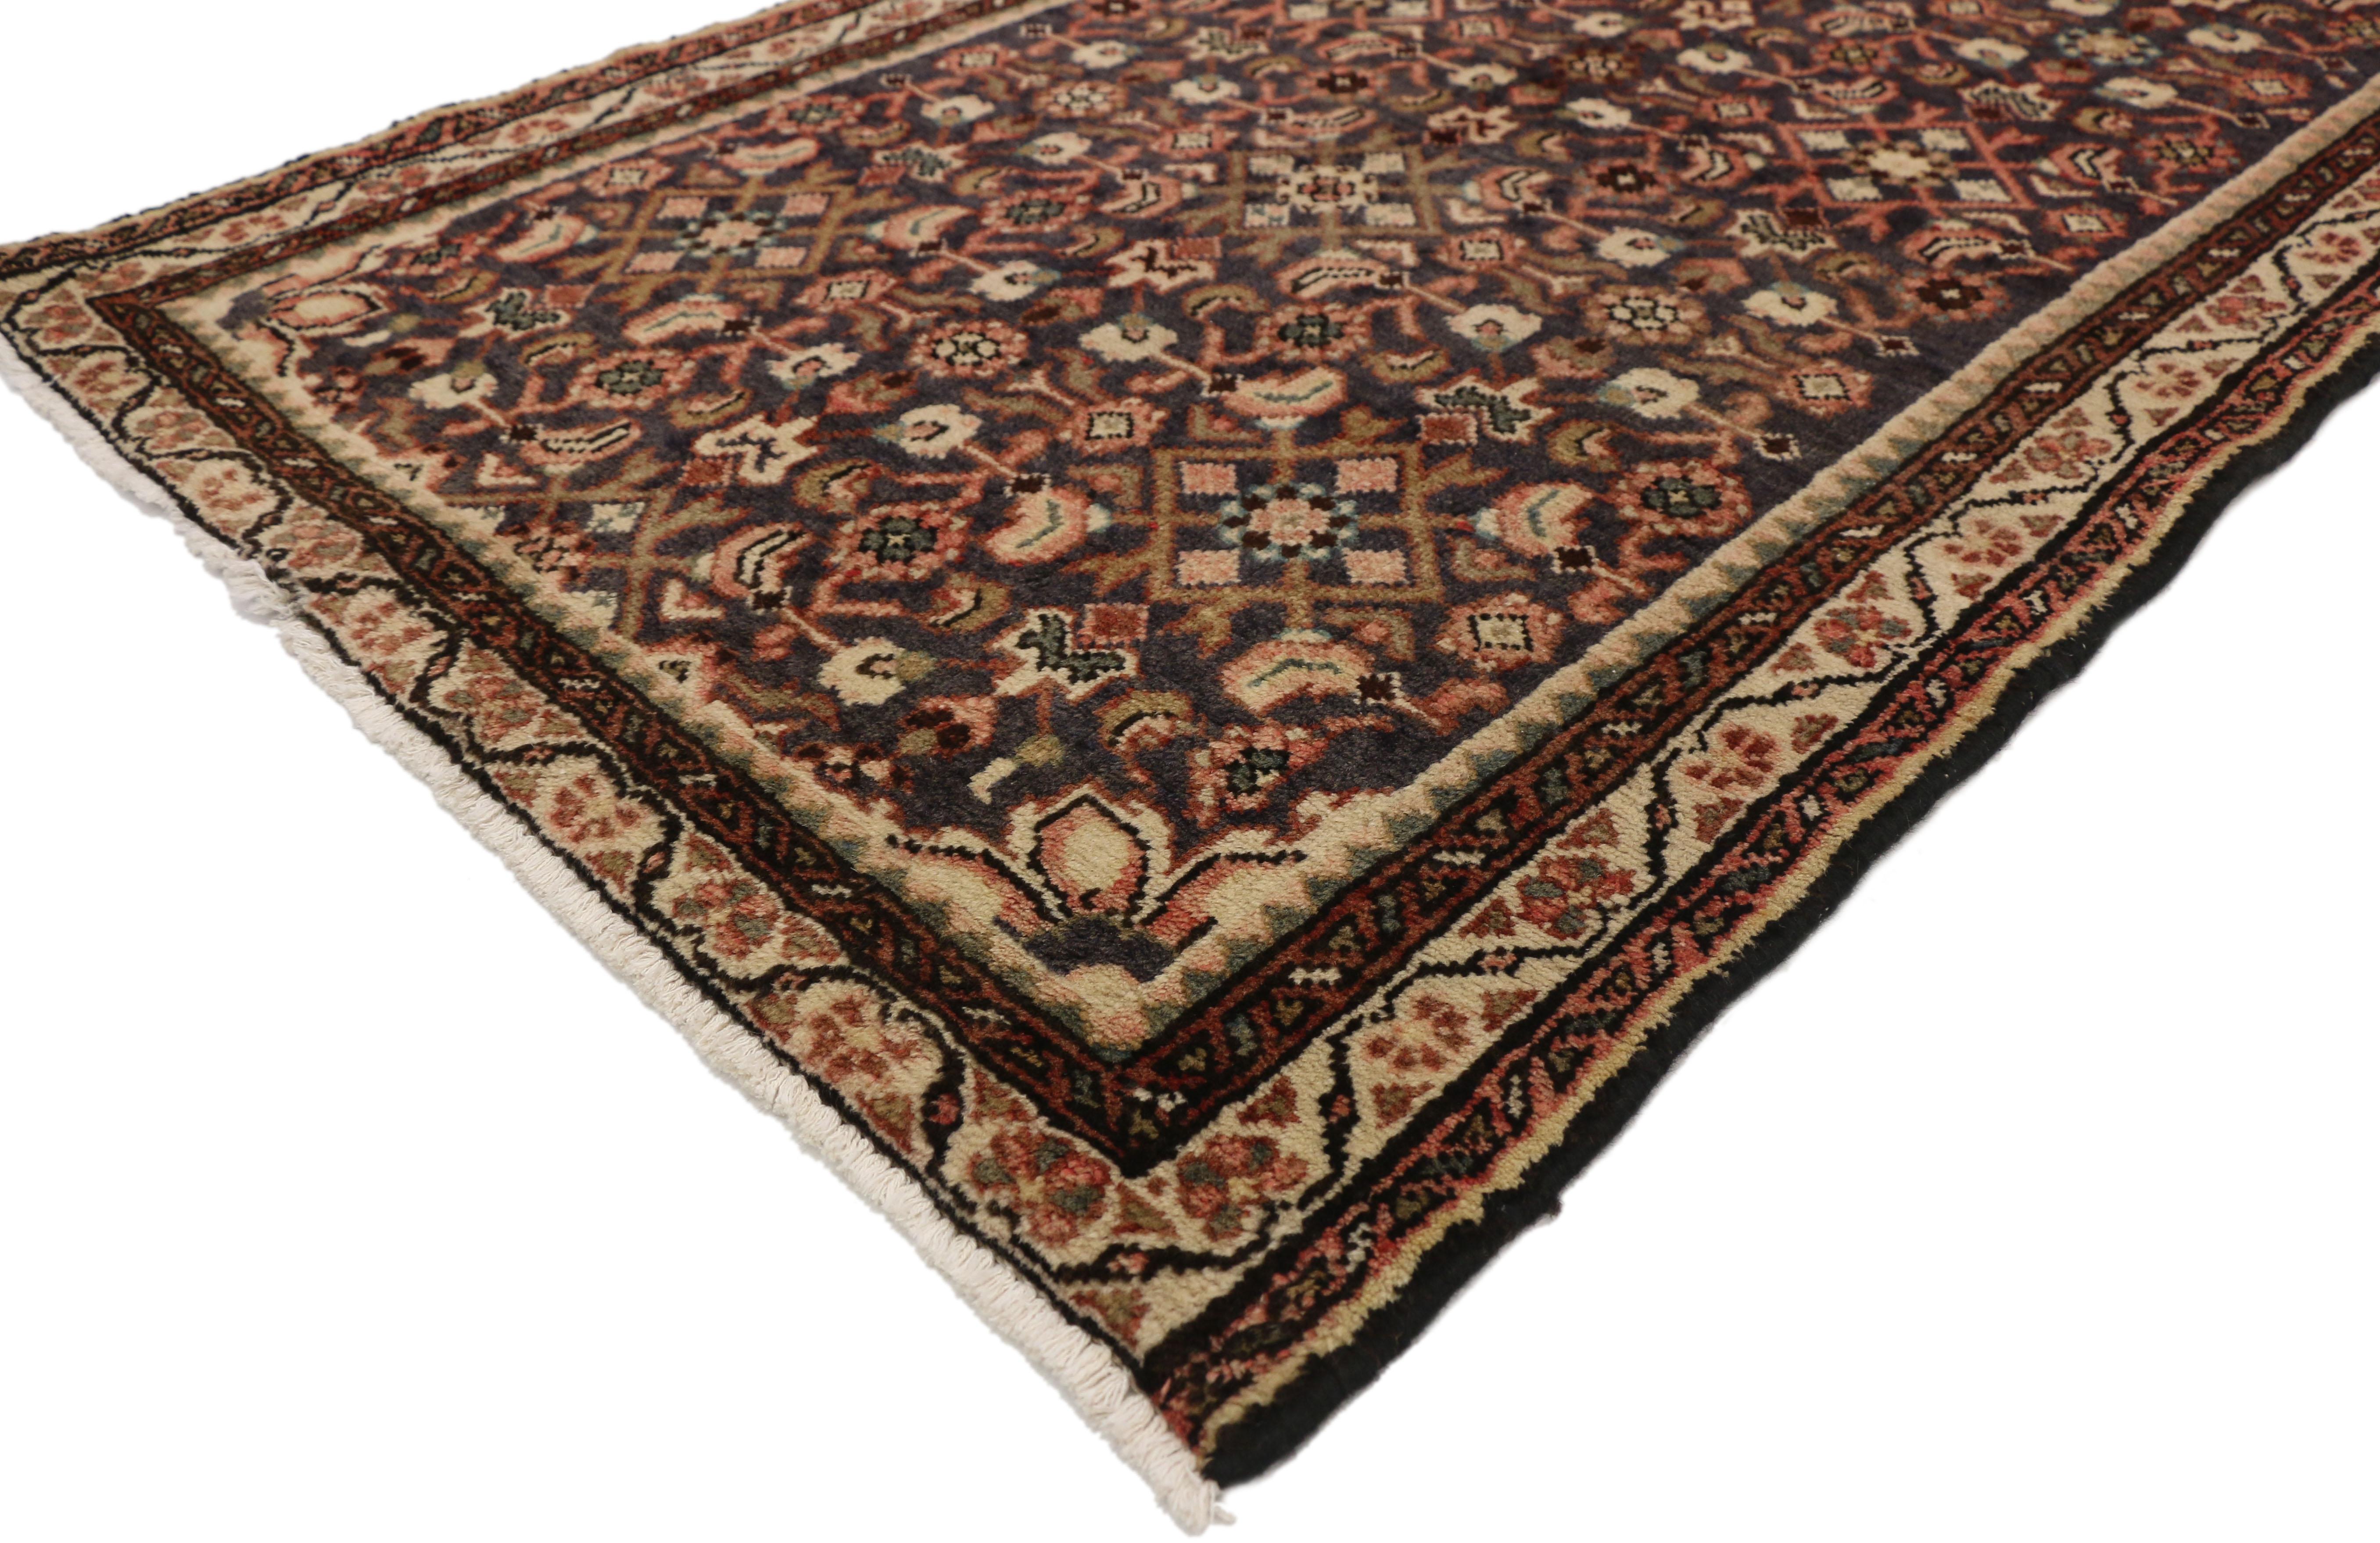 77289, vintage Persian Hamadan hallway runner with rustic Arts & Crafts style. This hand knotted wool vintage Persian Hamadan runner features a stepped diamond medallion floating in the center of an abrashed field. The lozenge medallion sports an